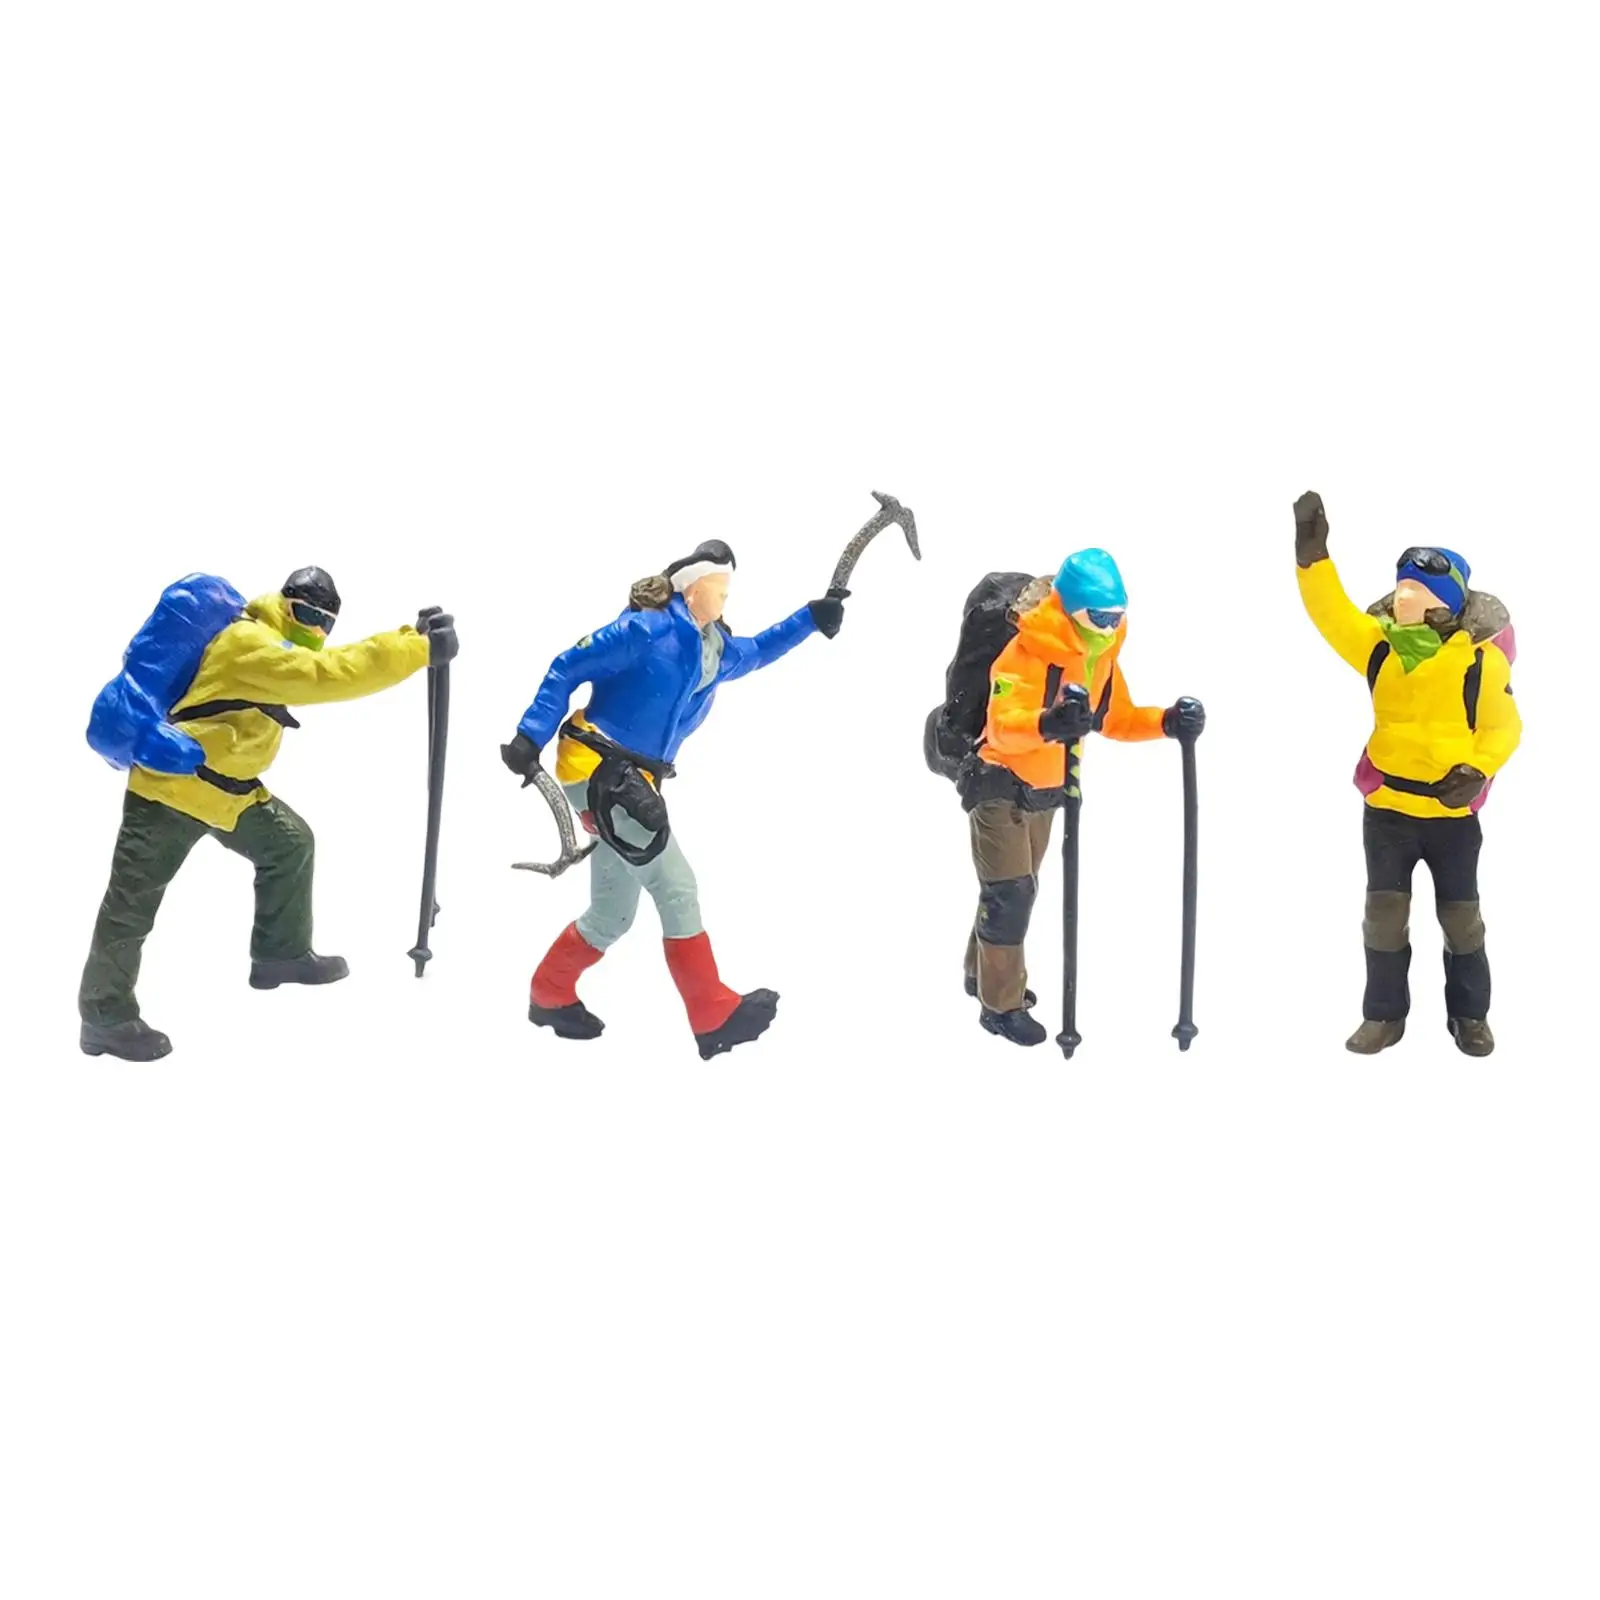 Resin 1/64 Climbing People Figurines Mountaineering People Figurines Ornament for Diorama DIY Scene Dollhouse Layout Decor